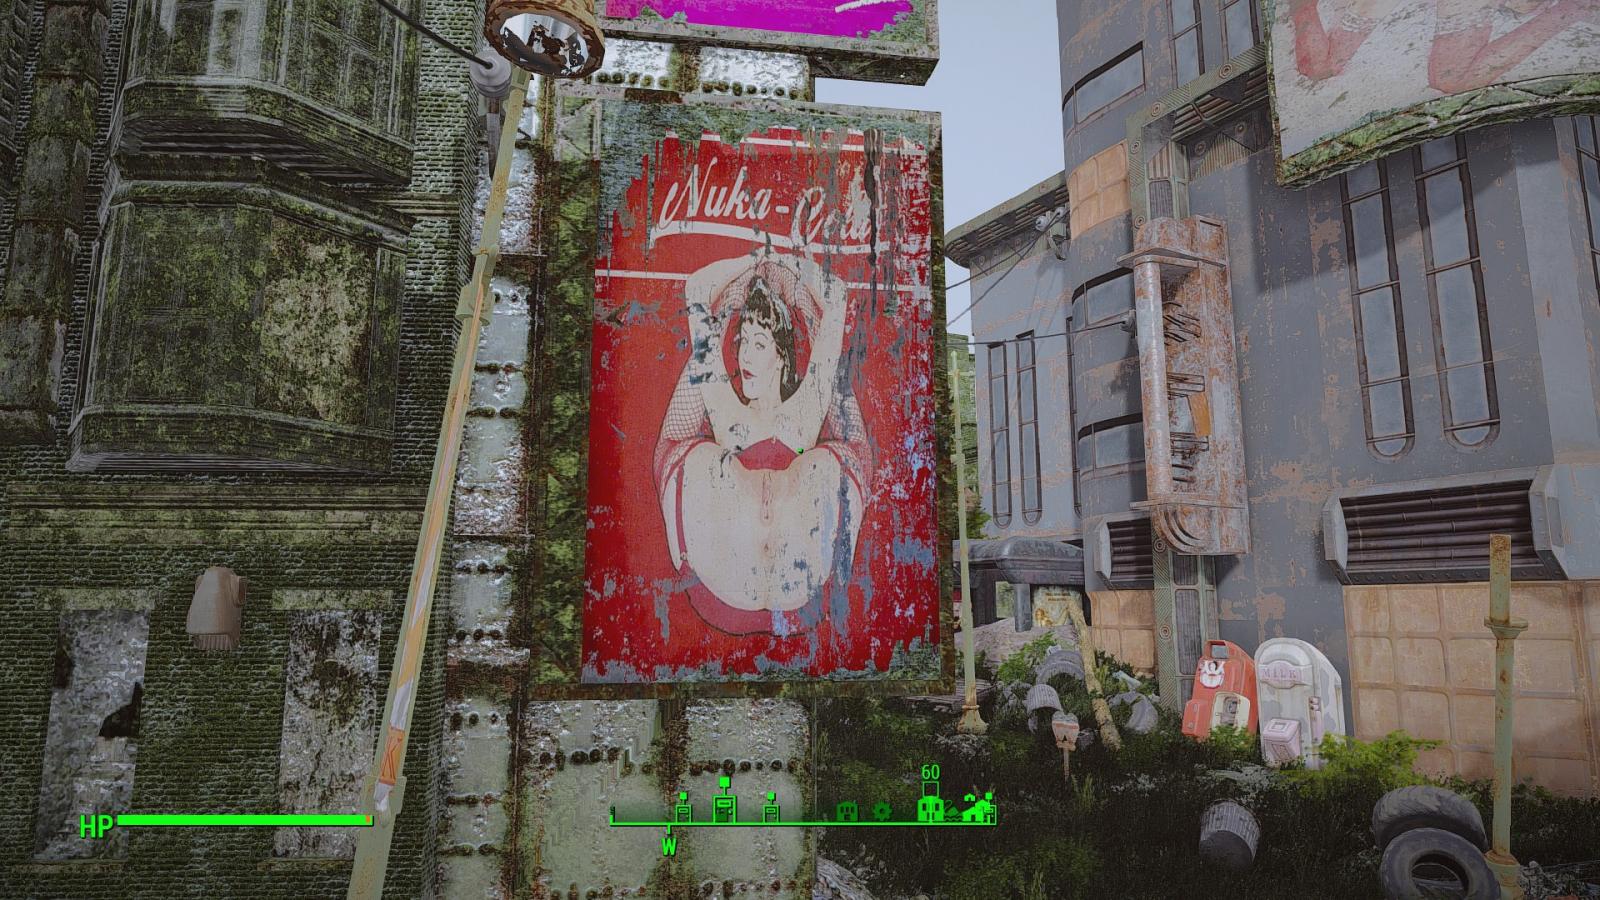 Nsfw Billboards And Posters Downloads Fallout 4 Adult And Sex Mods